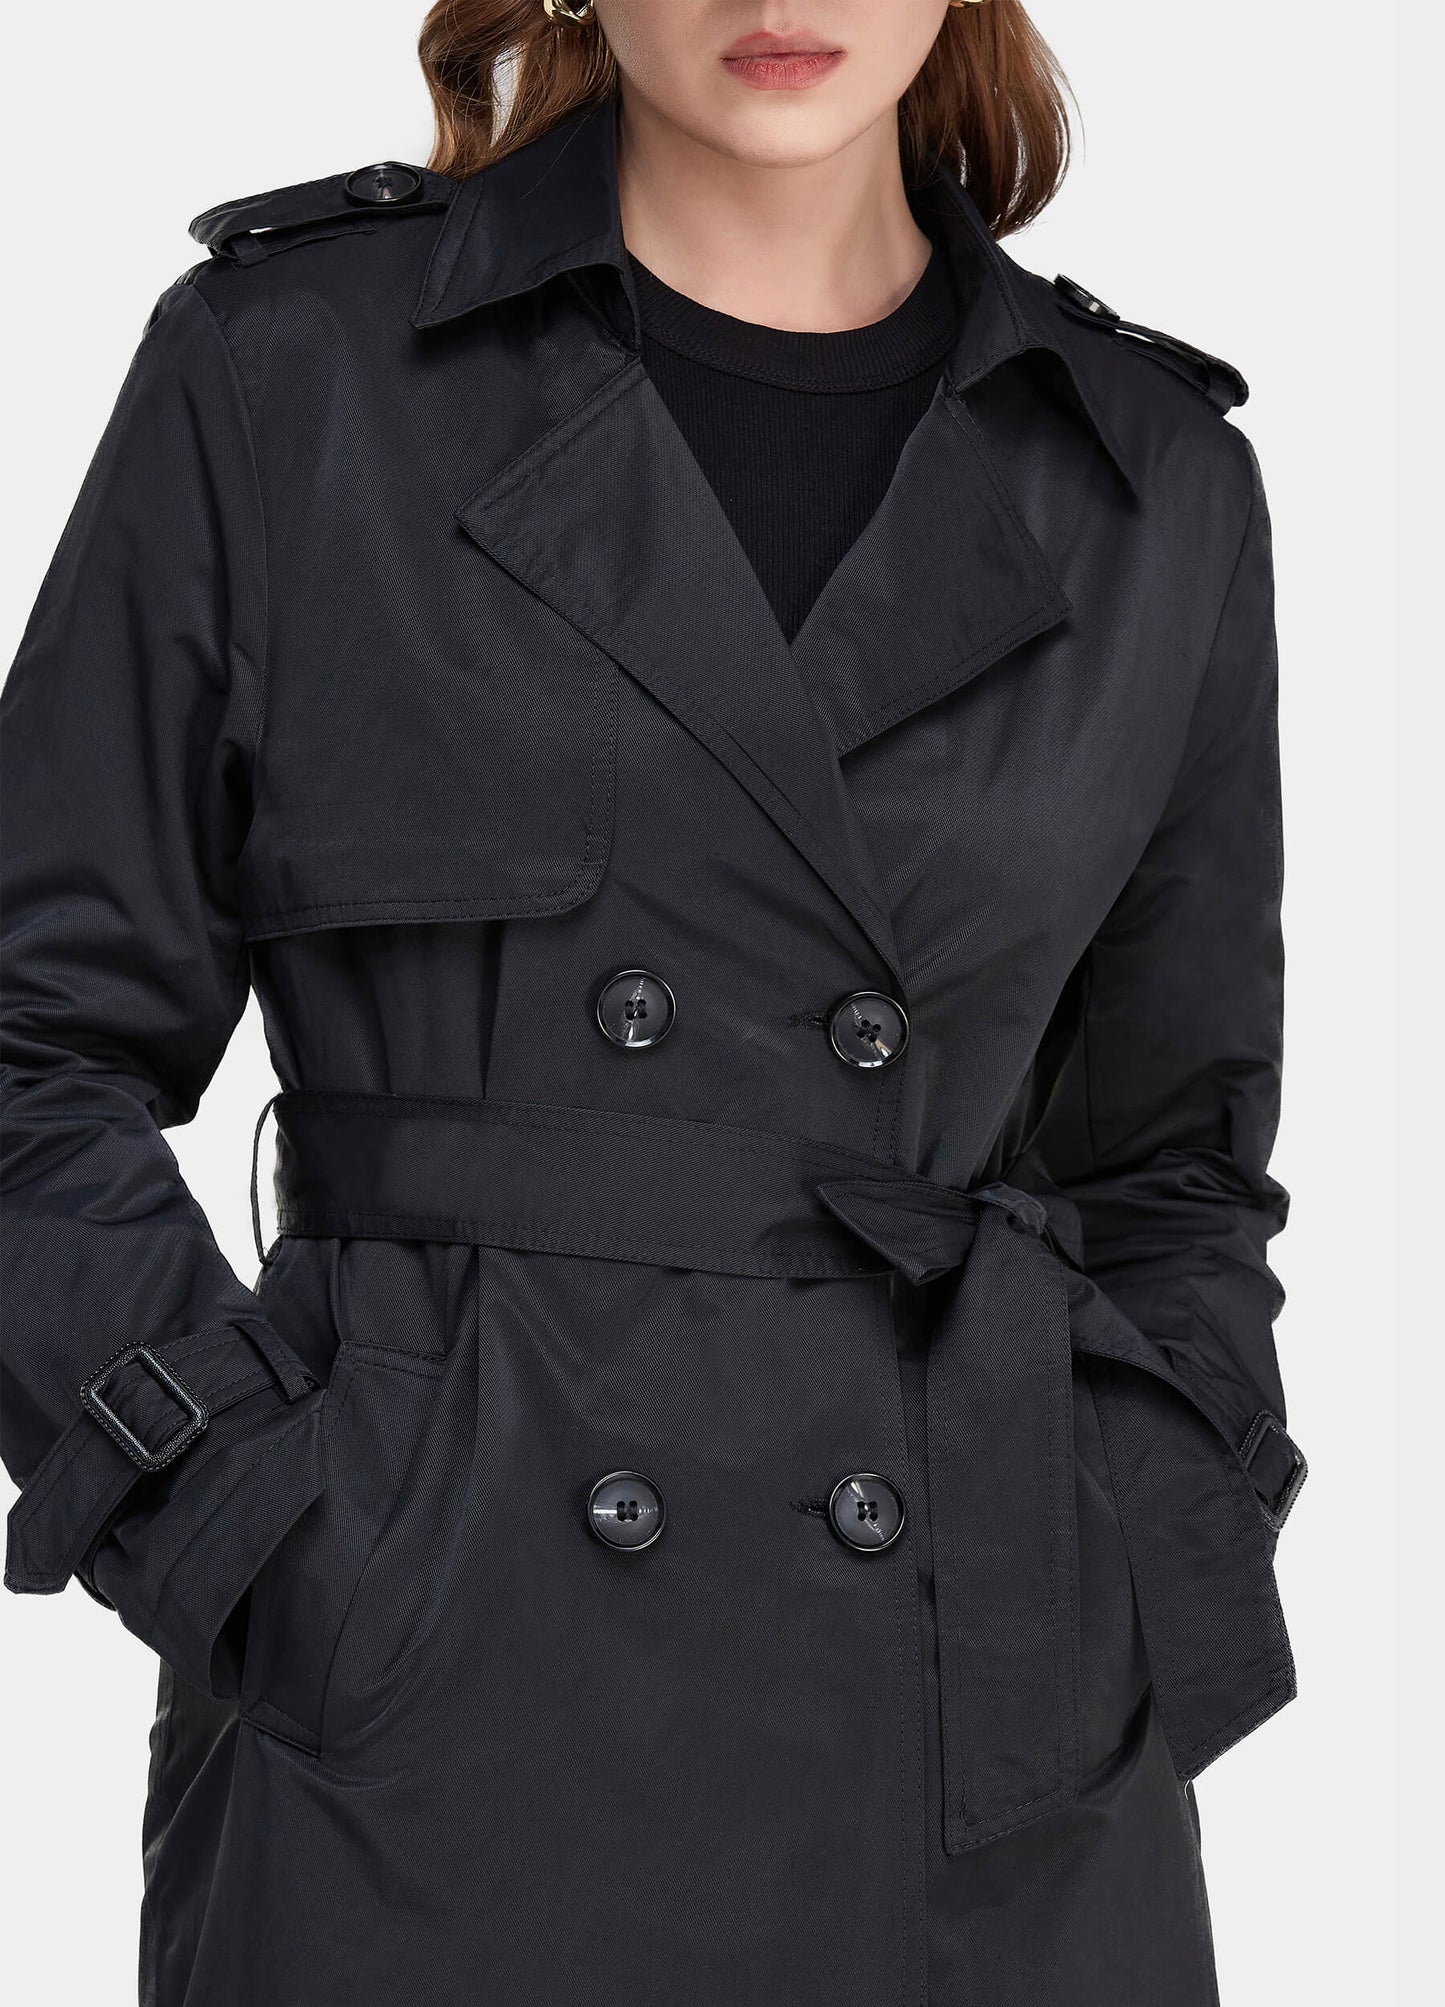 Women's Fall Double Breasted Buckle Belted Black Trench Coat